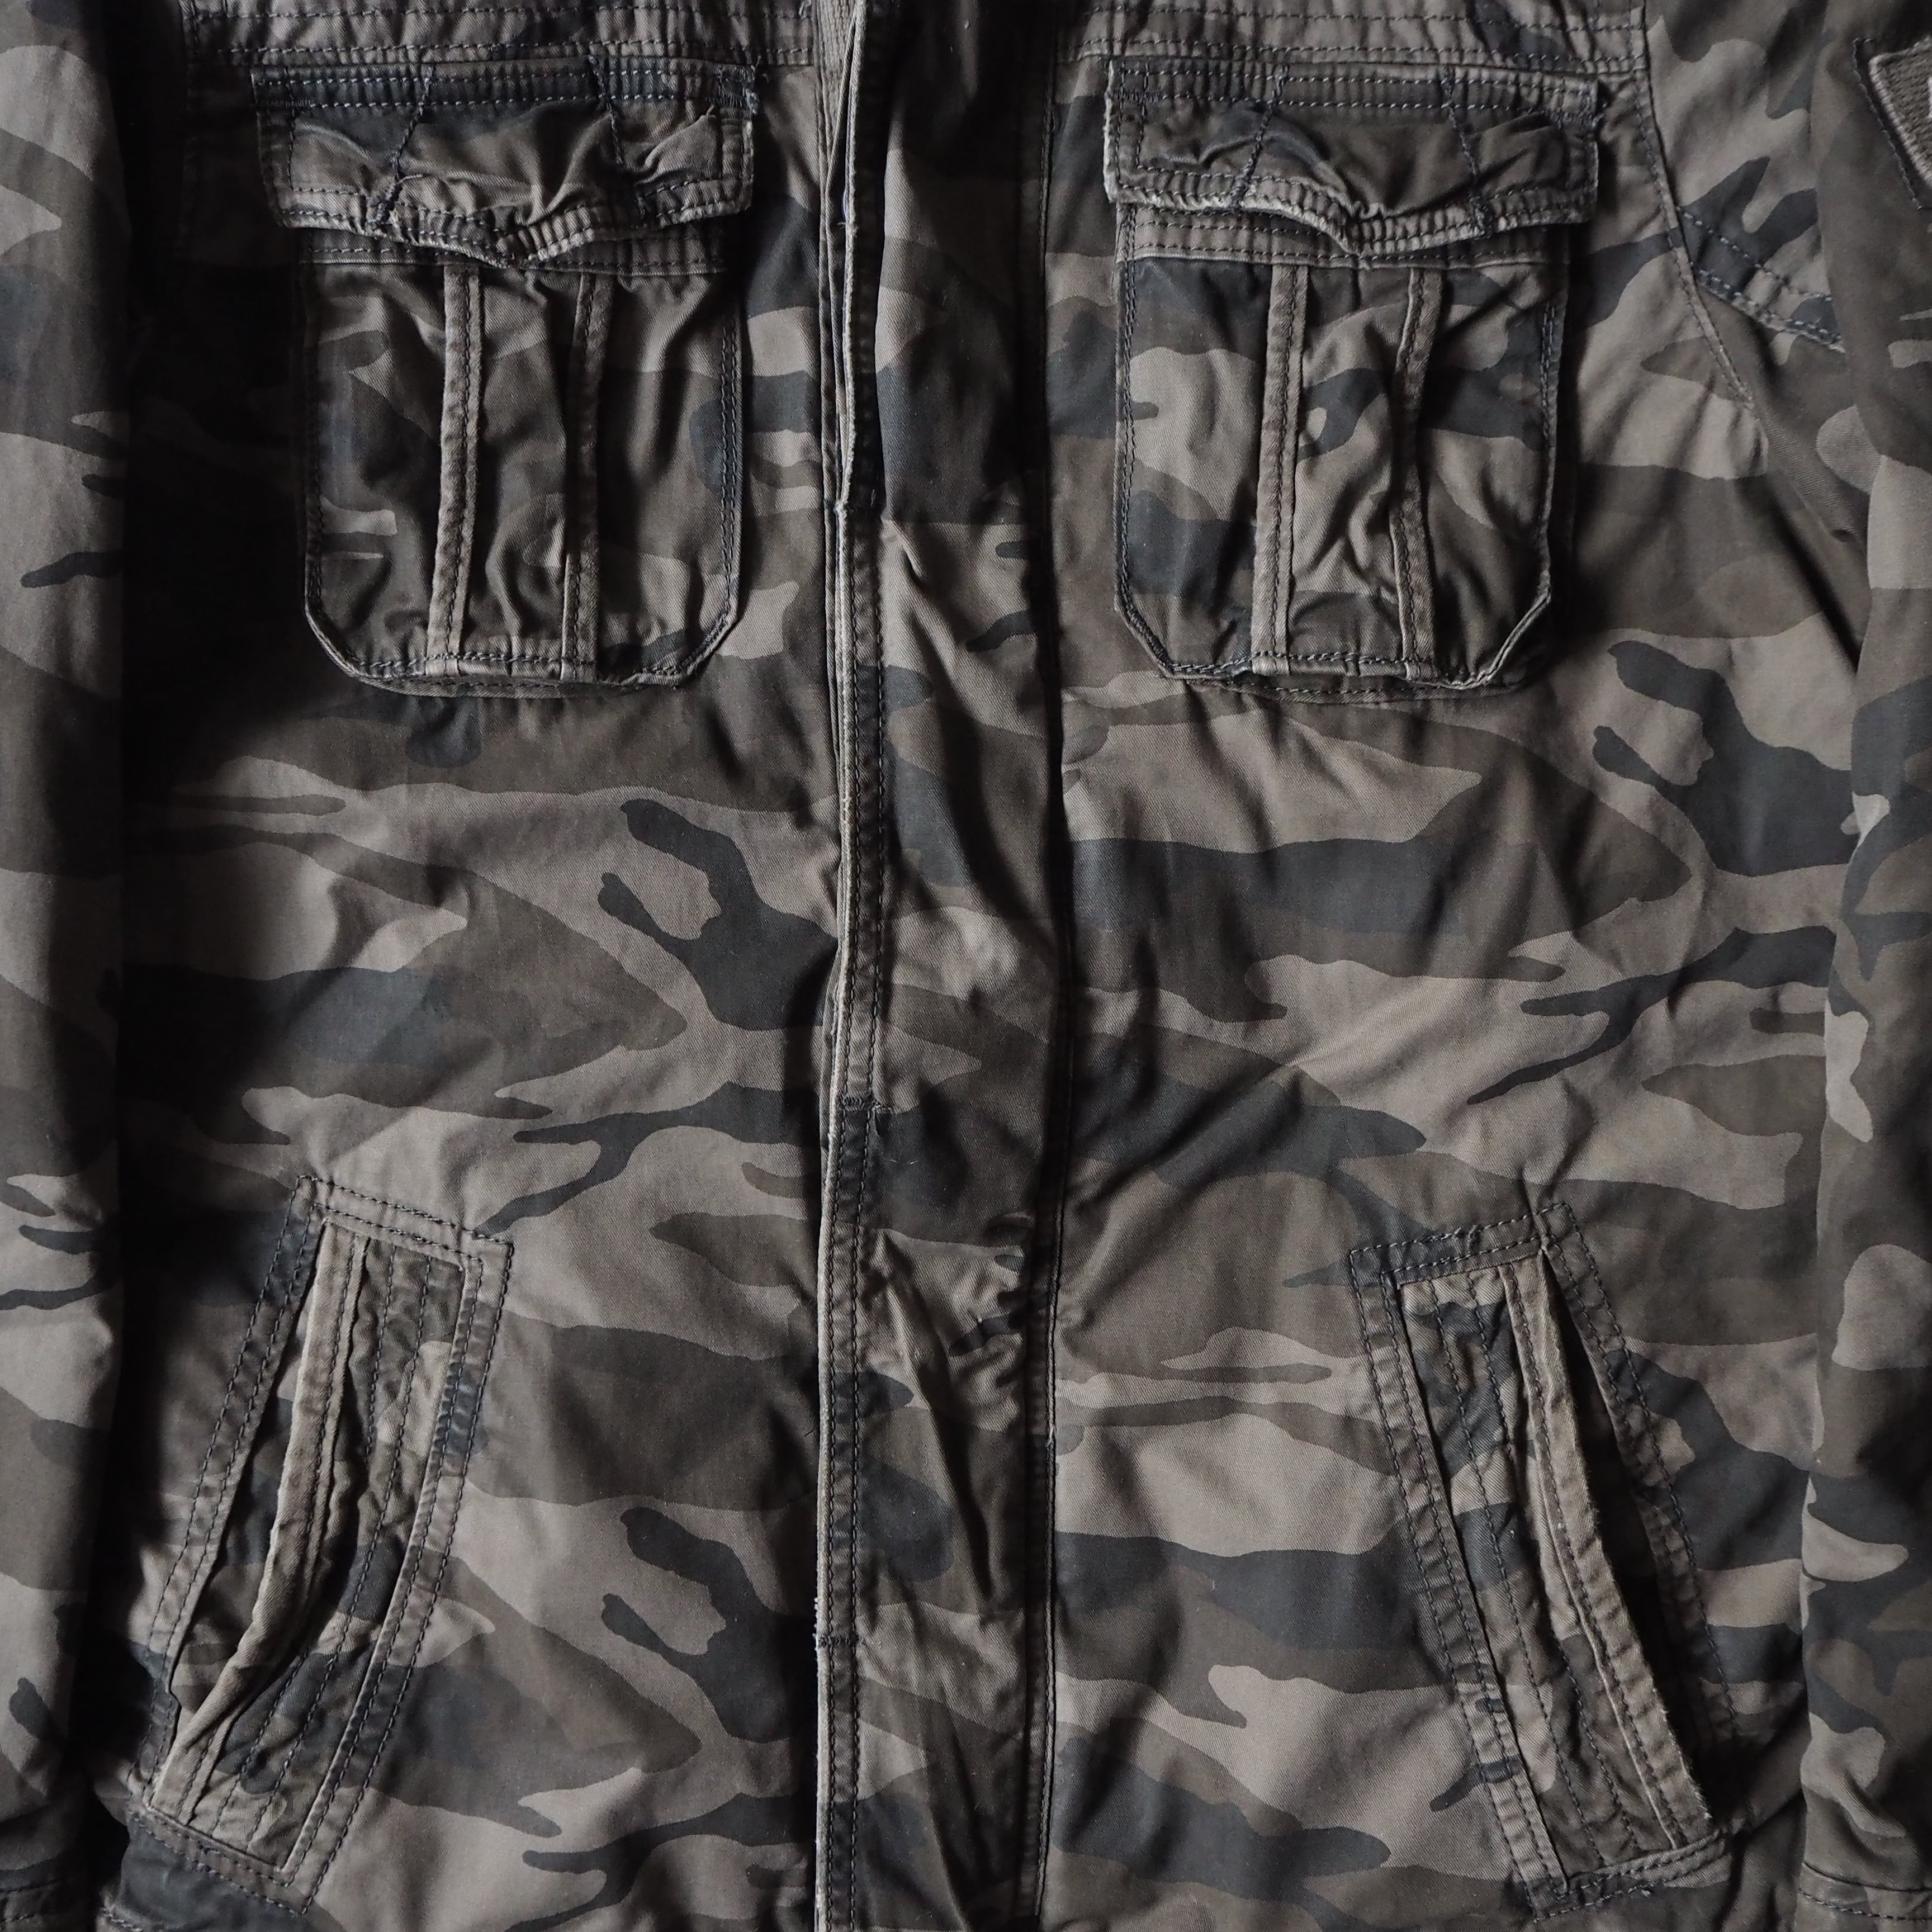 00s “ Abercrombie & Fitch” M-65 type brown woodland camo pattern